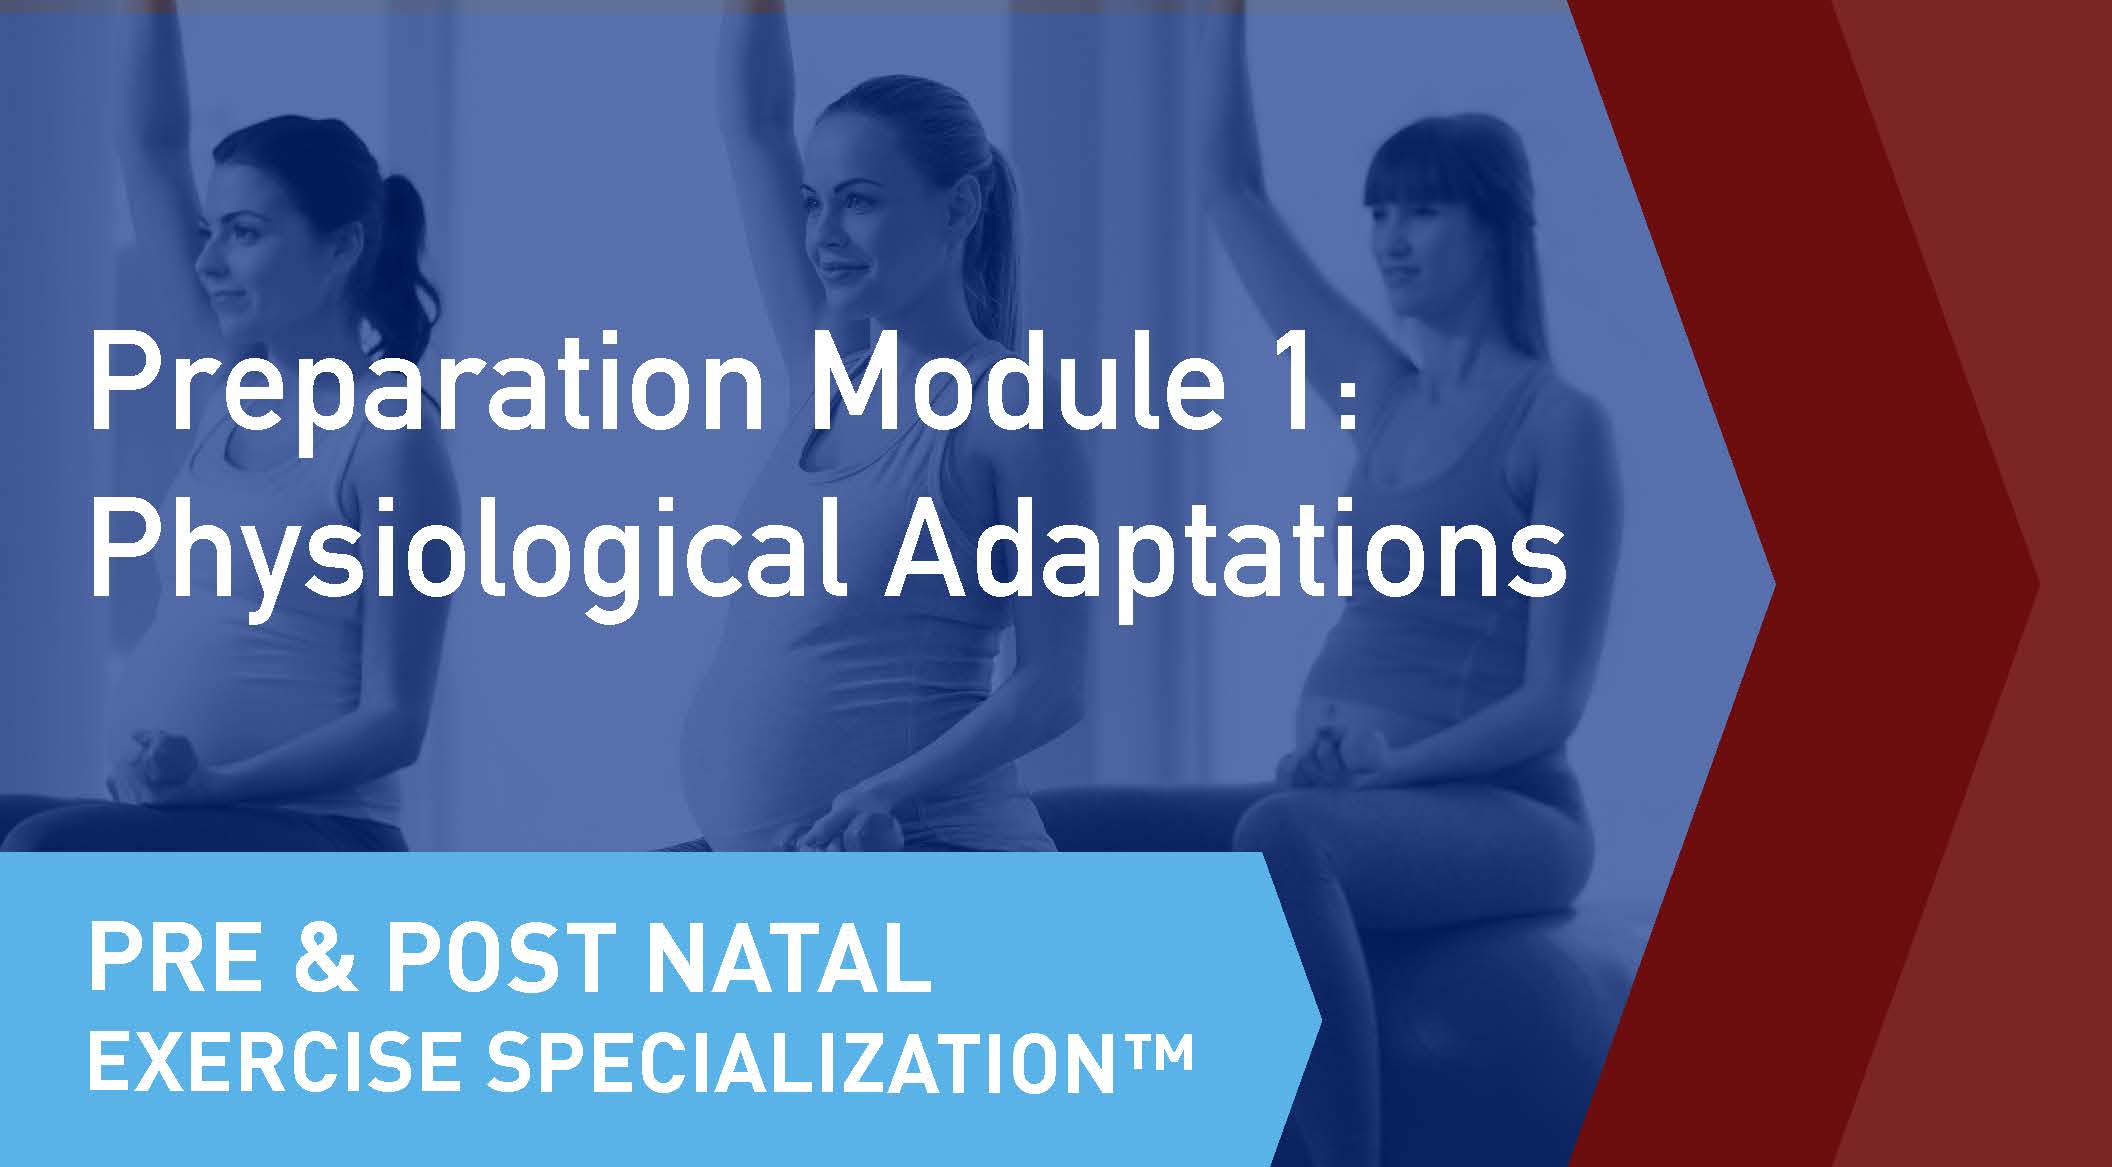 The online learning module cover of the CSEP Pre and Postnatal Exercise Specialization Preparation Module 1